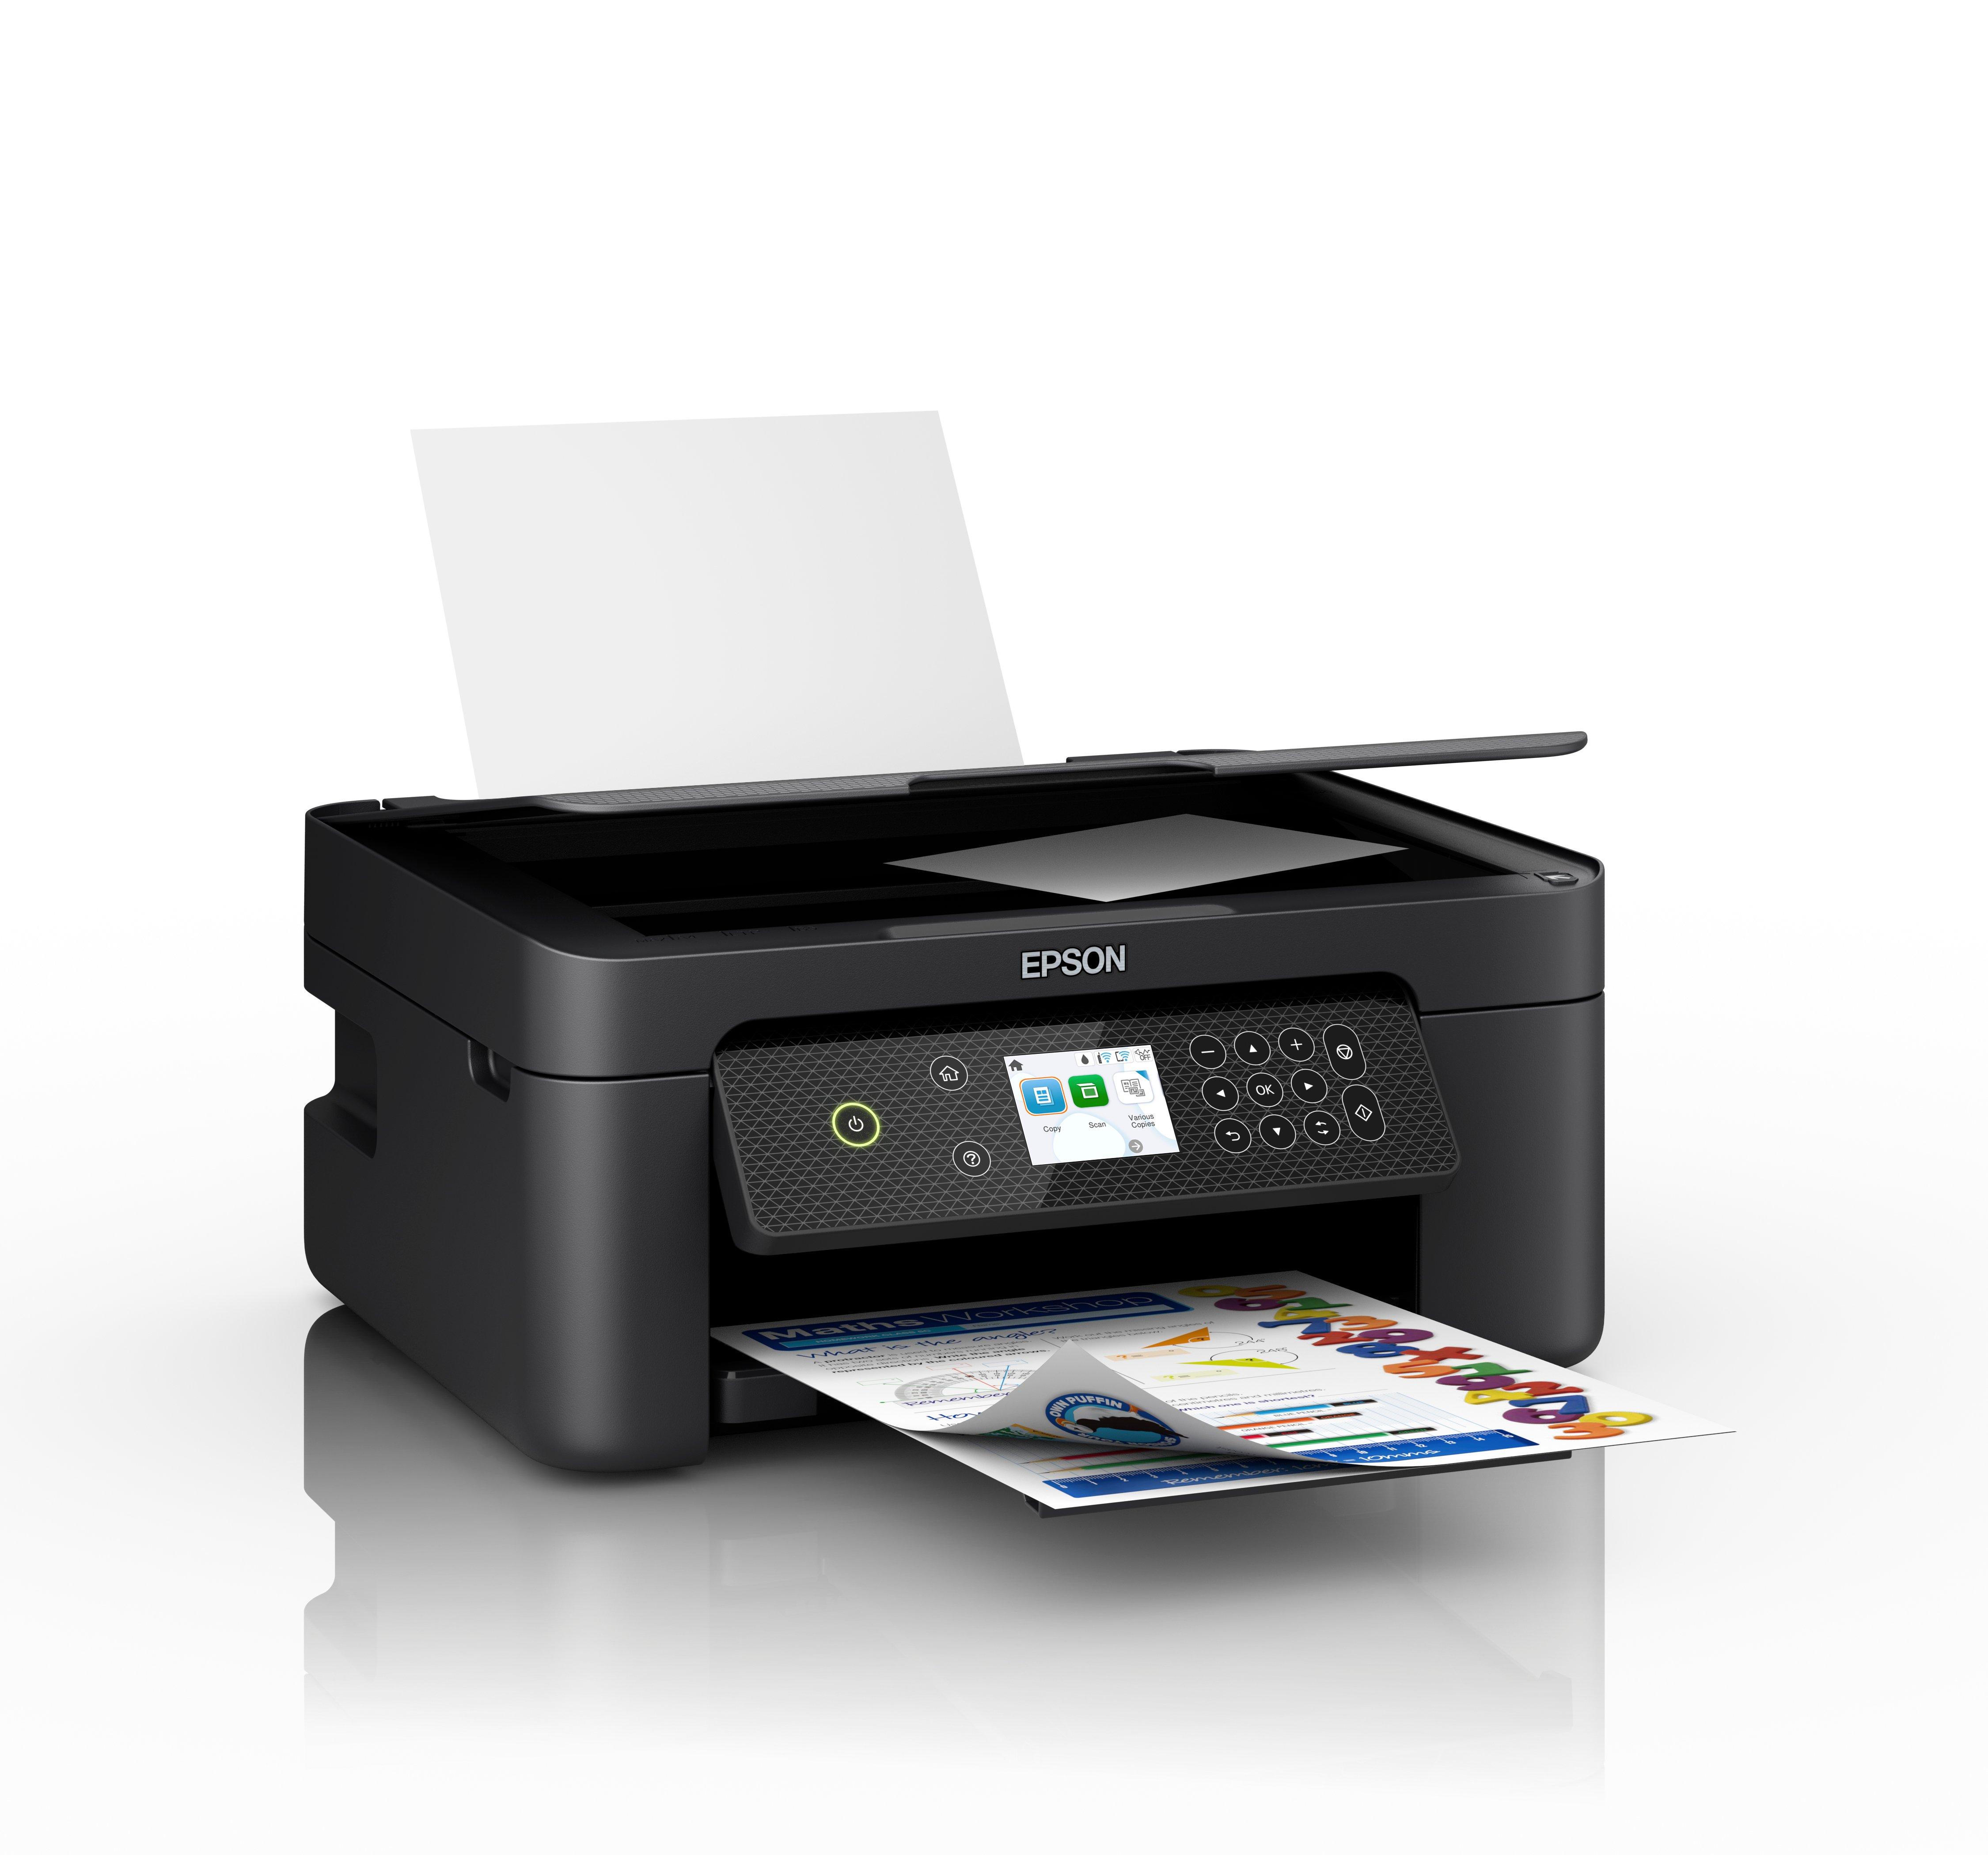 EPSON Expression Home XP-4200